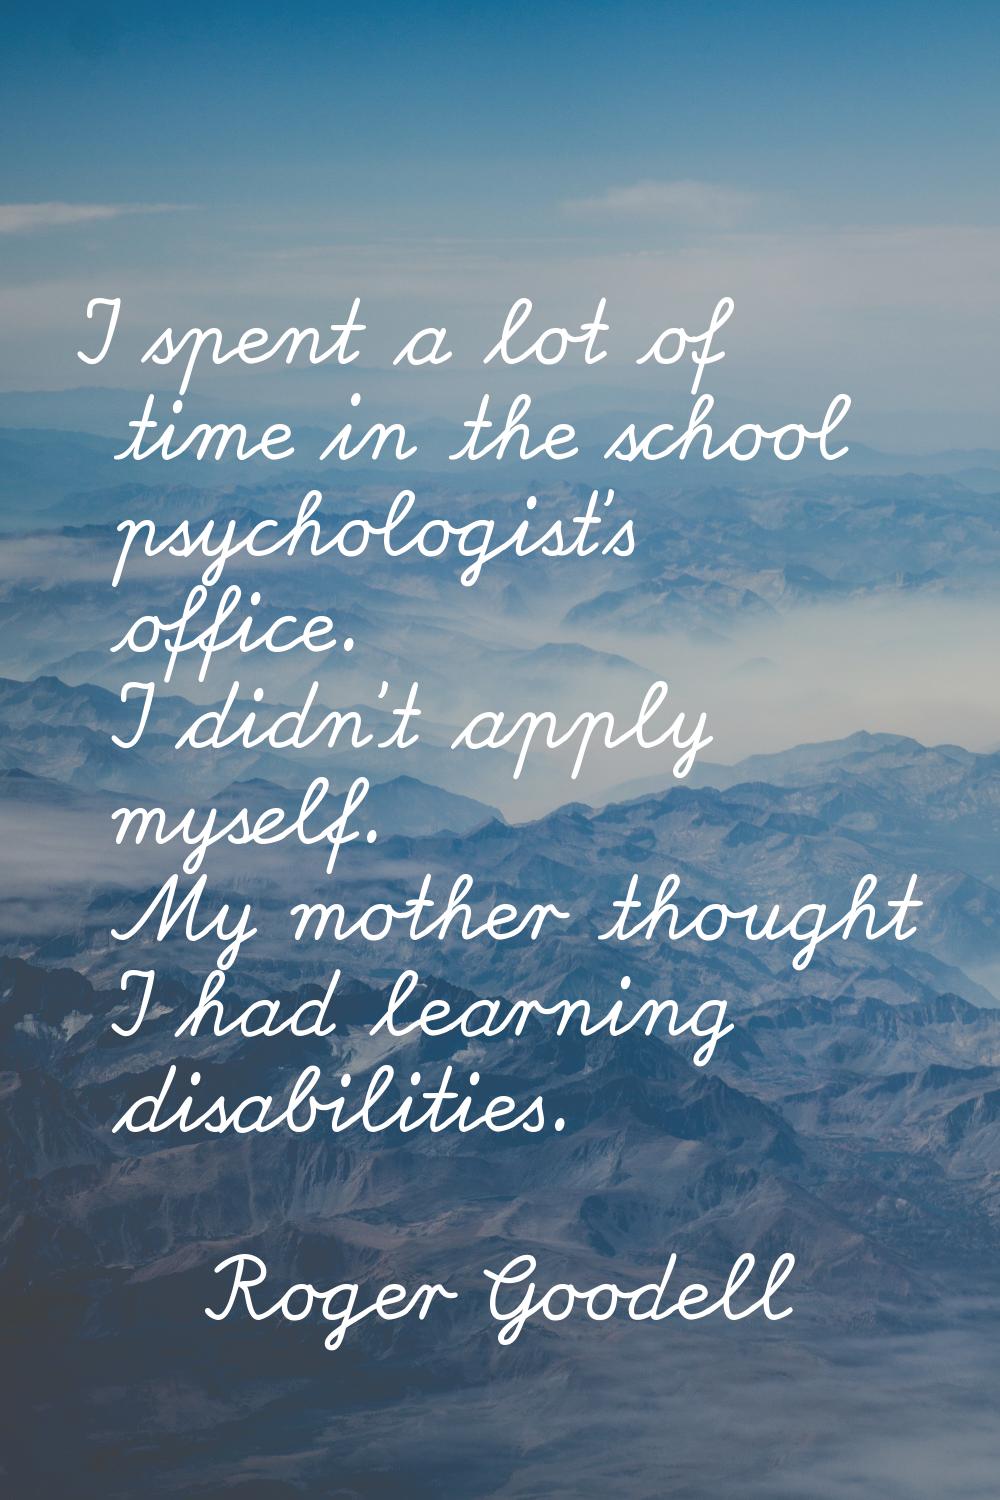 I spent a lot of time in the school psychologist's office. I didn't apply myself. My mother thought